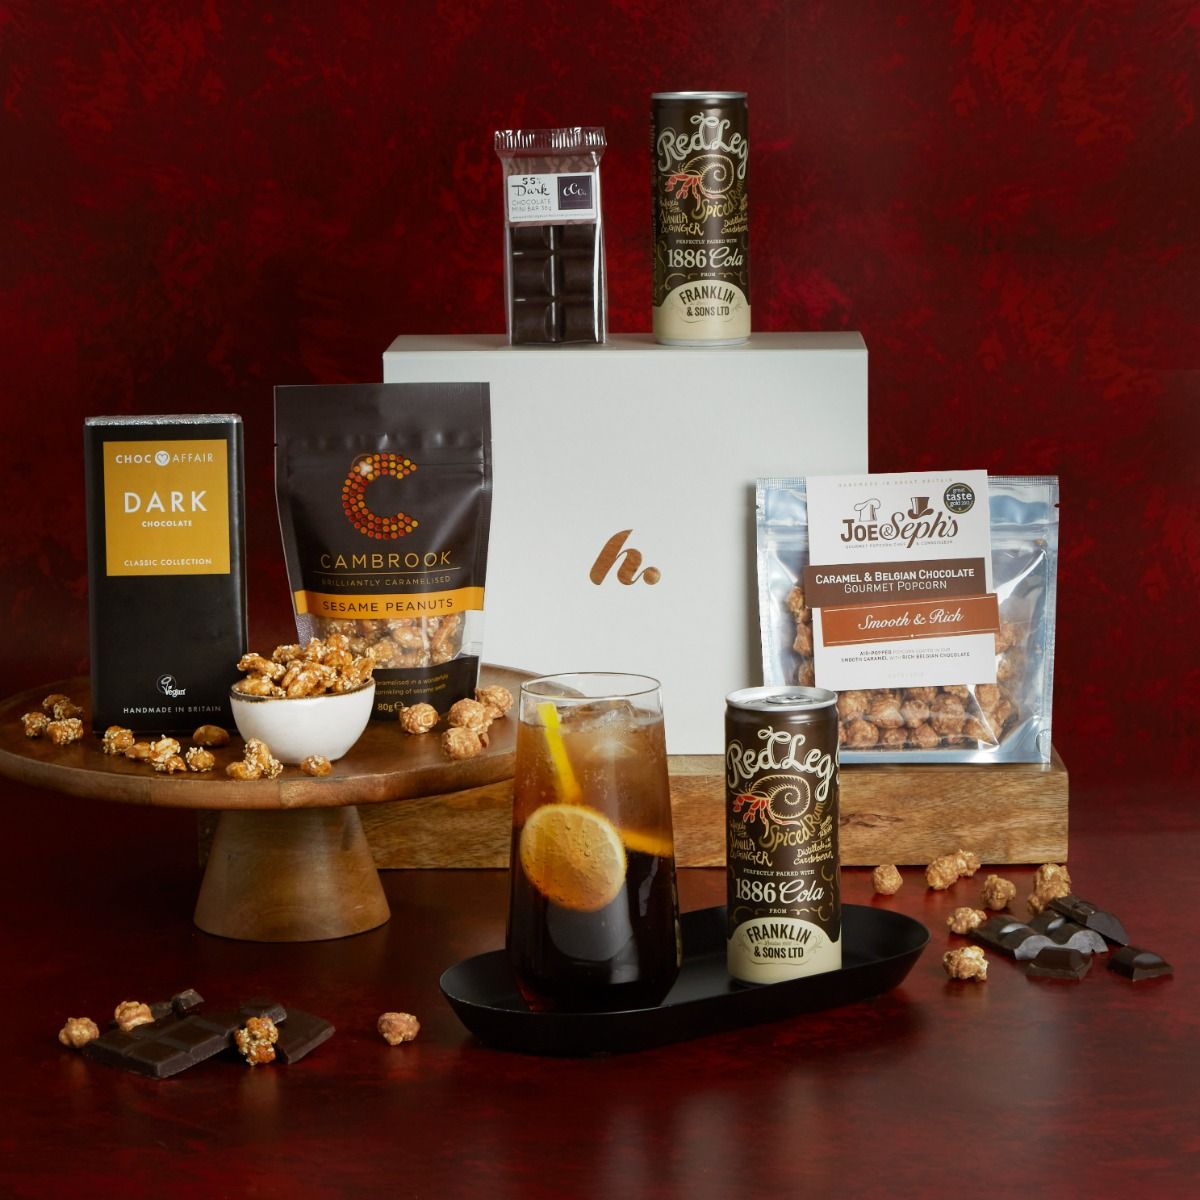 The Rum and Treats Hamper with Contents on Display